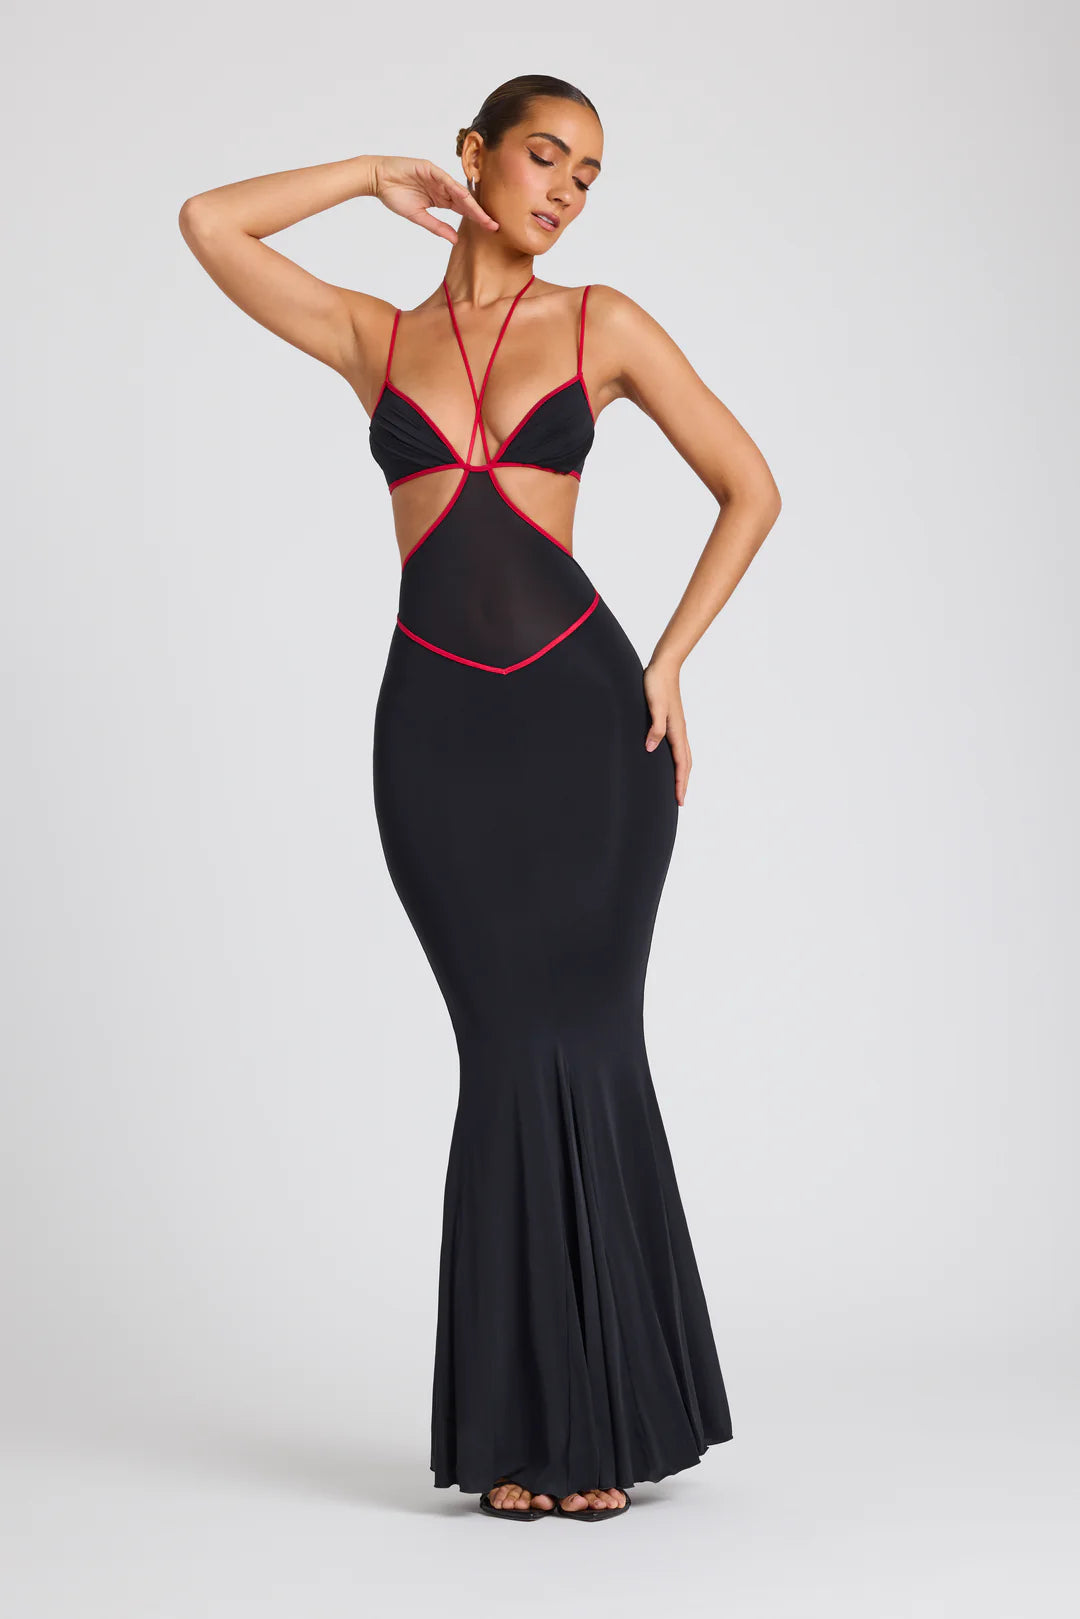 Contrast Binding Cut Out Evening Gown in Black